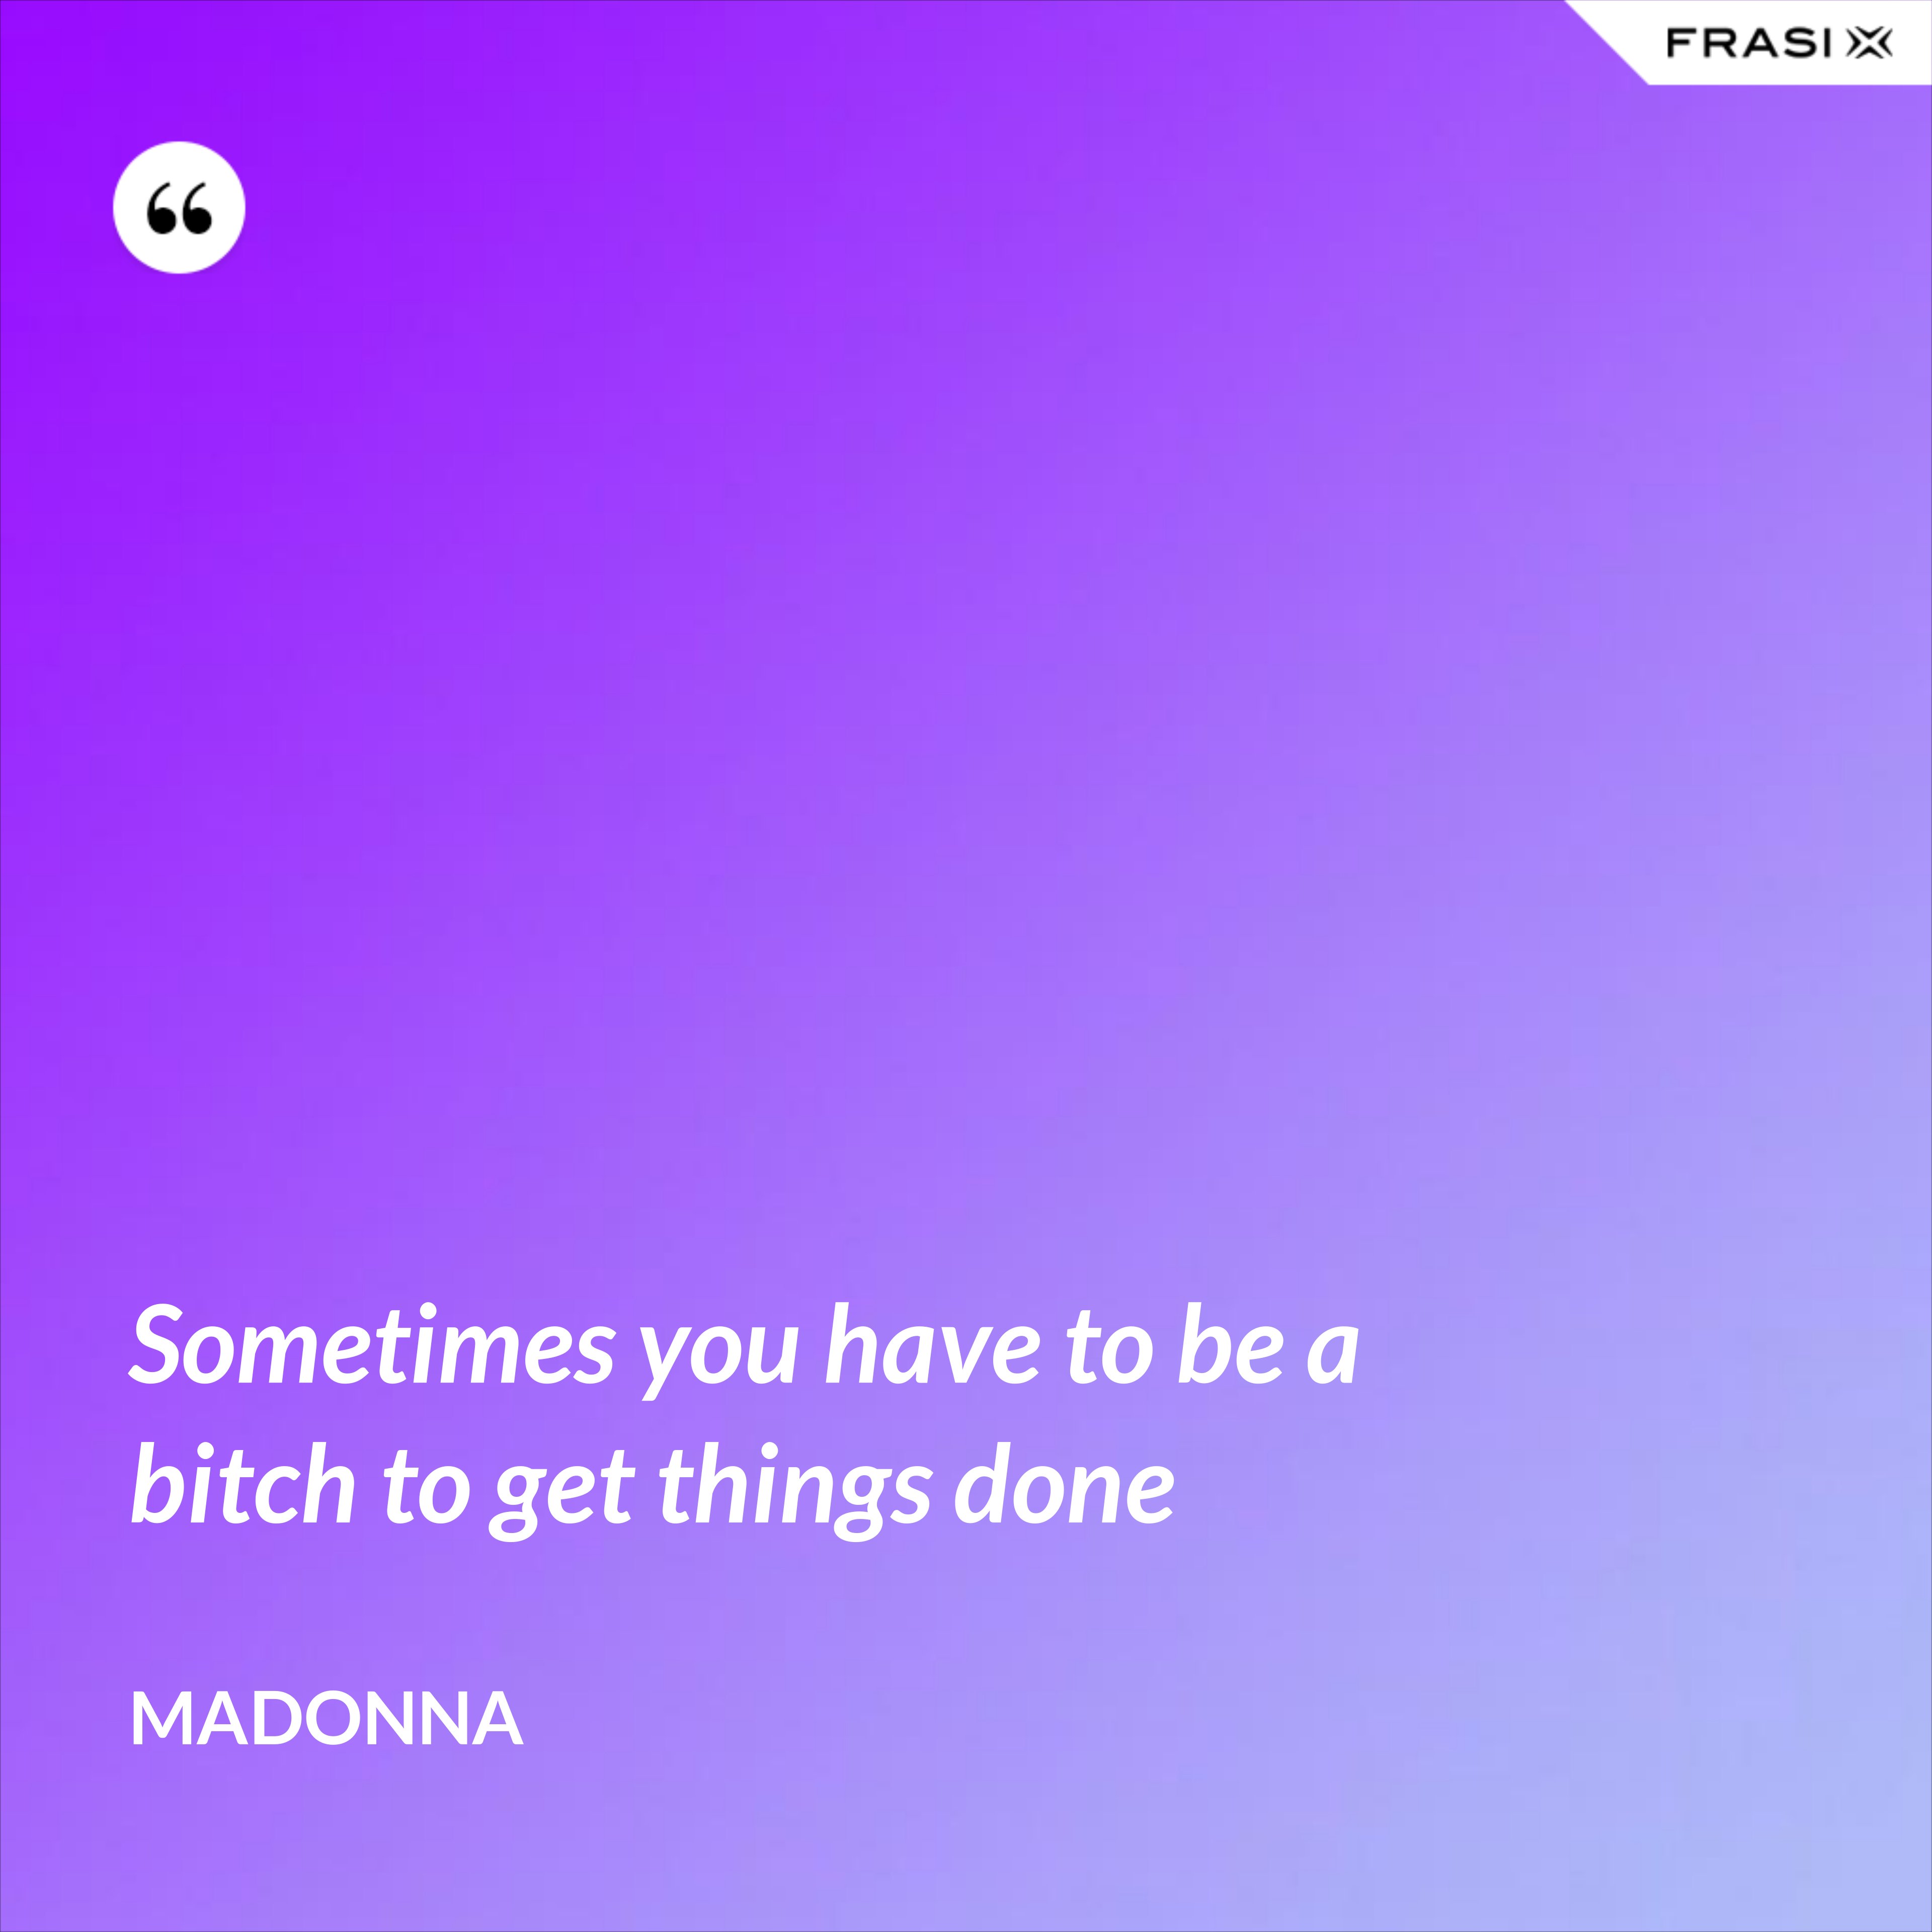 Sometimes you have to be a bitch to get things done - Madonna